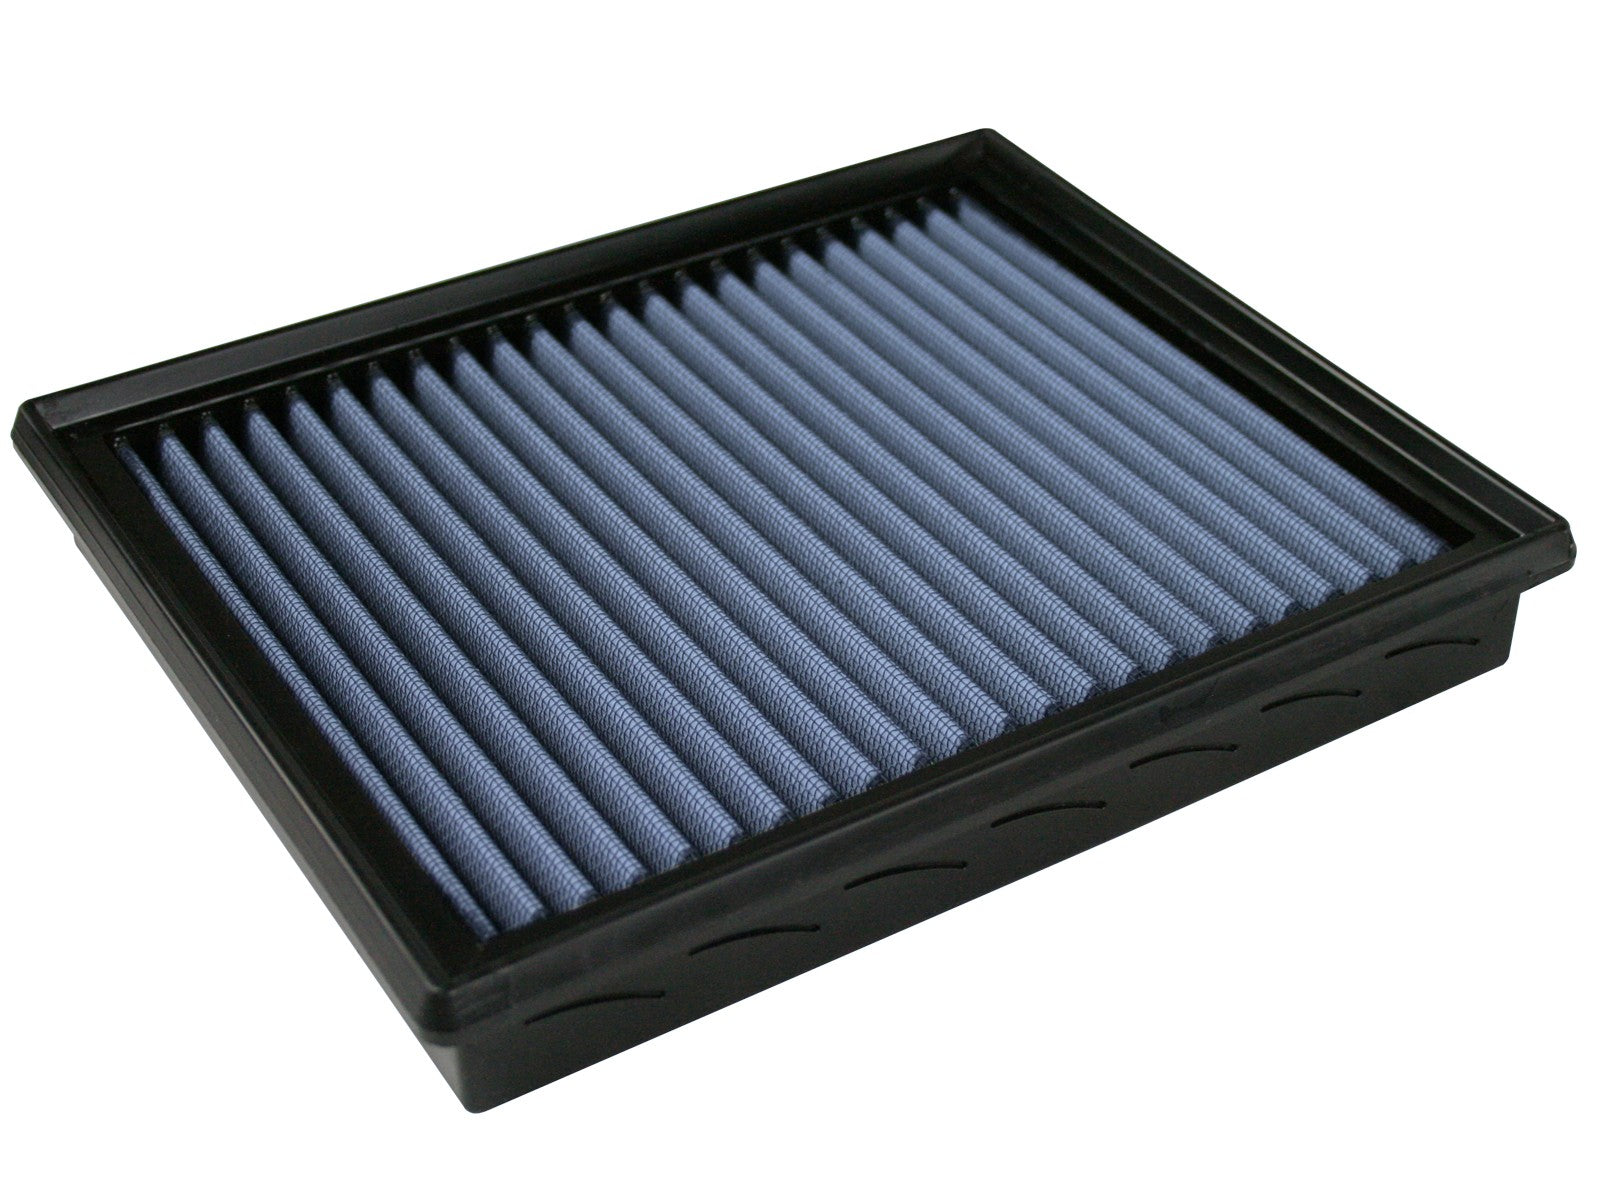 Magnum FLOW OE Replacement Air Filter w/ Pro 5R Media Audi Cars 96-05 / BMW Cars 93-06 / Volkswagen Cars 98-05